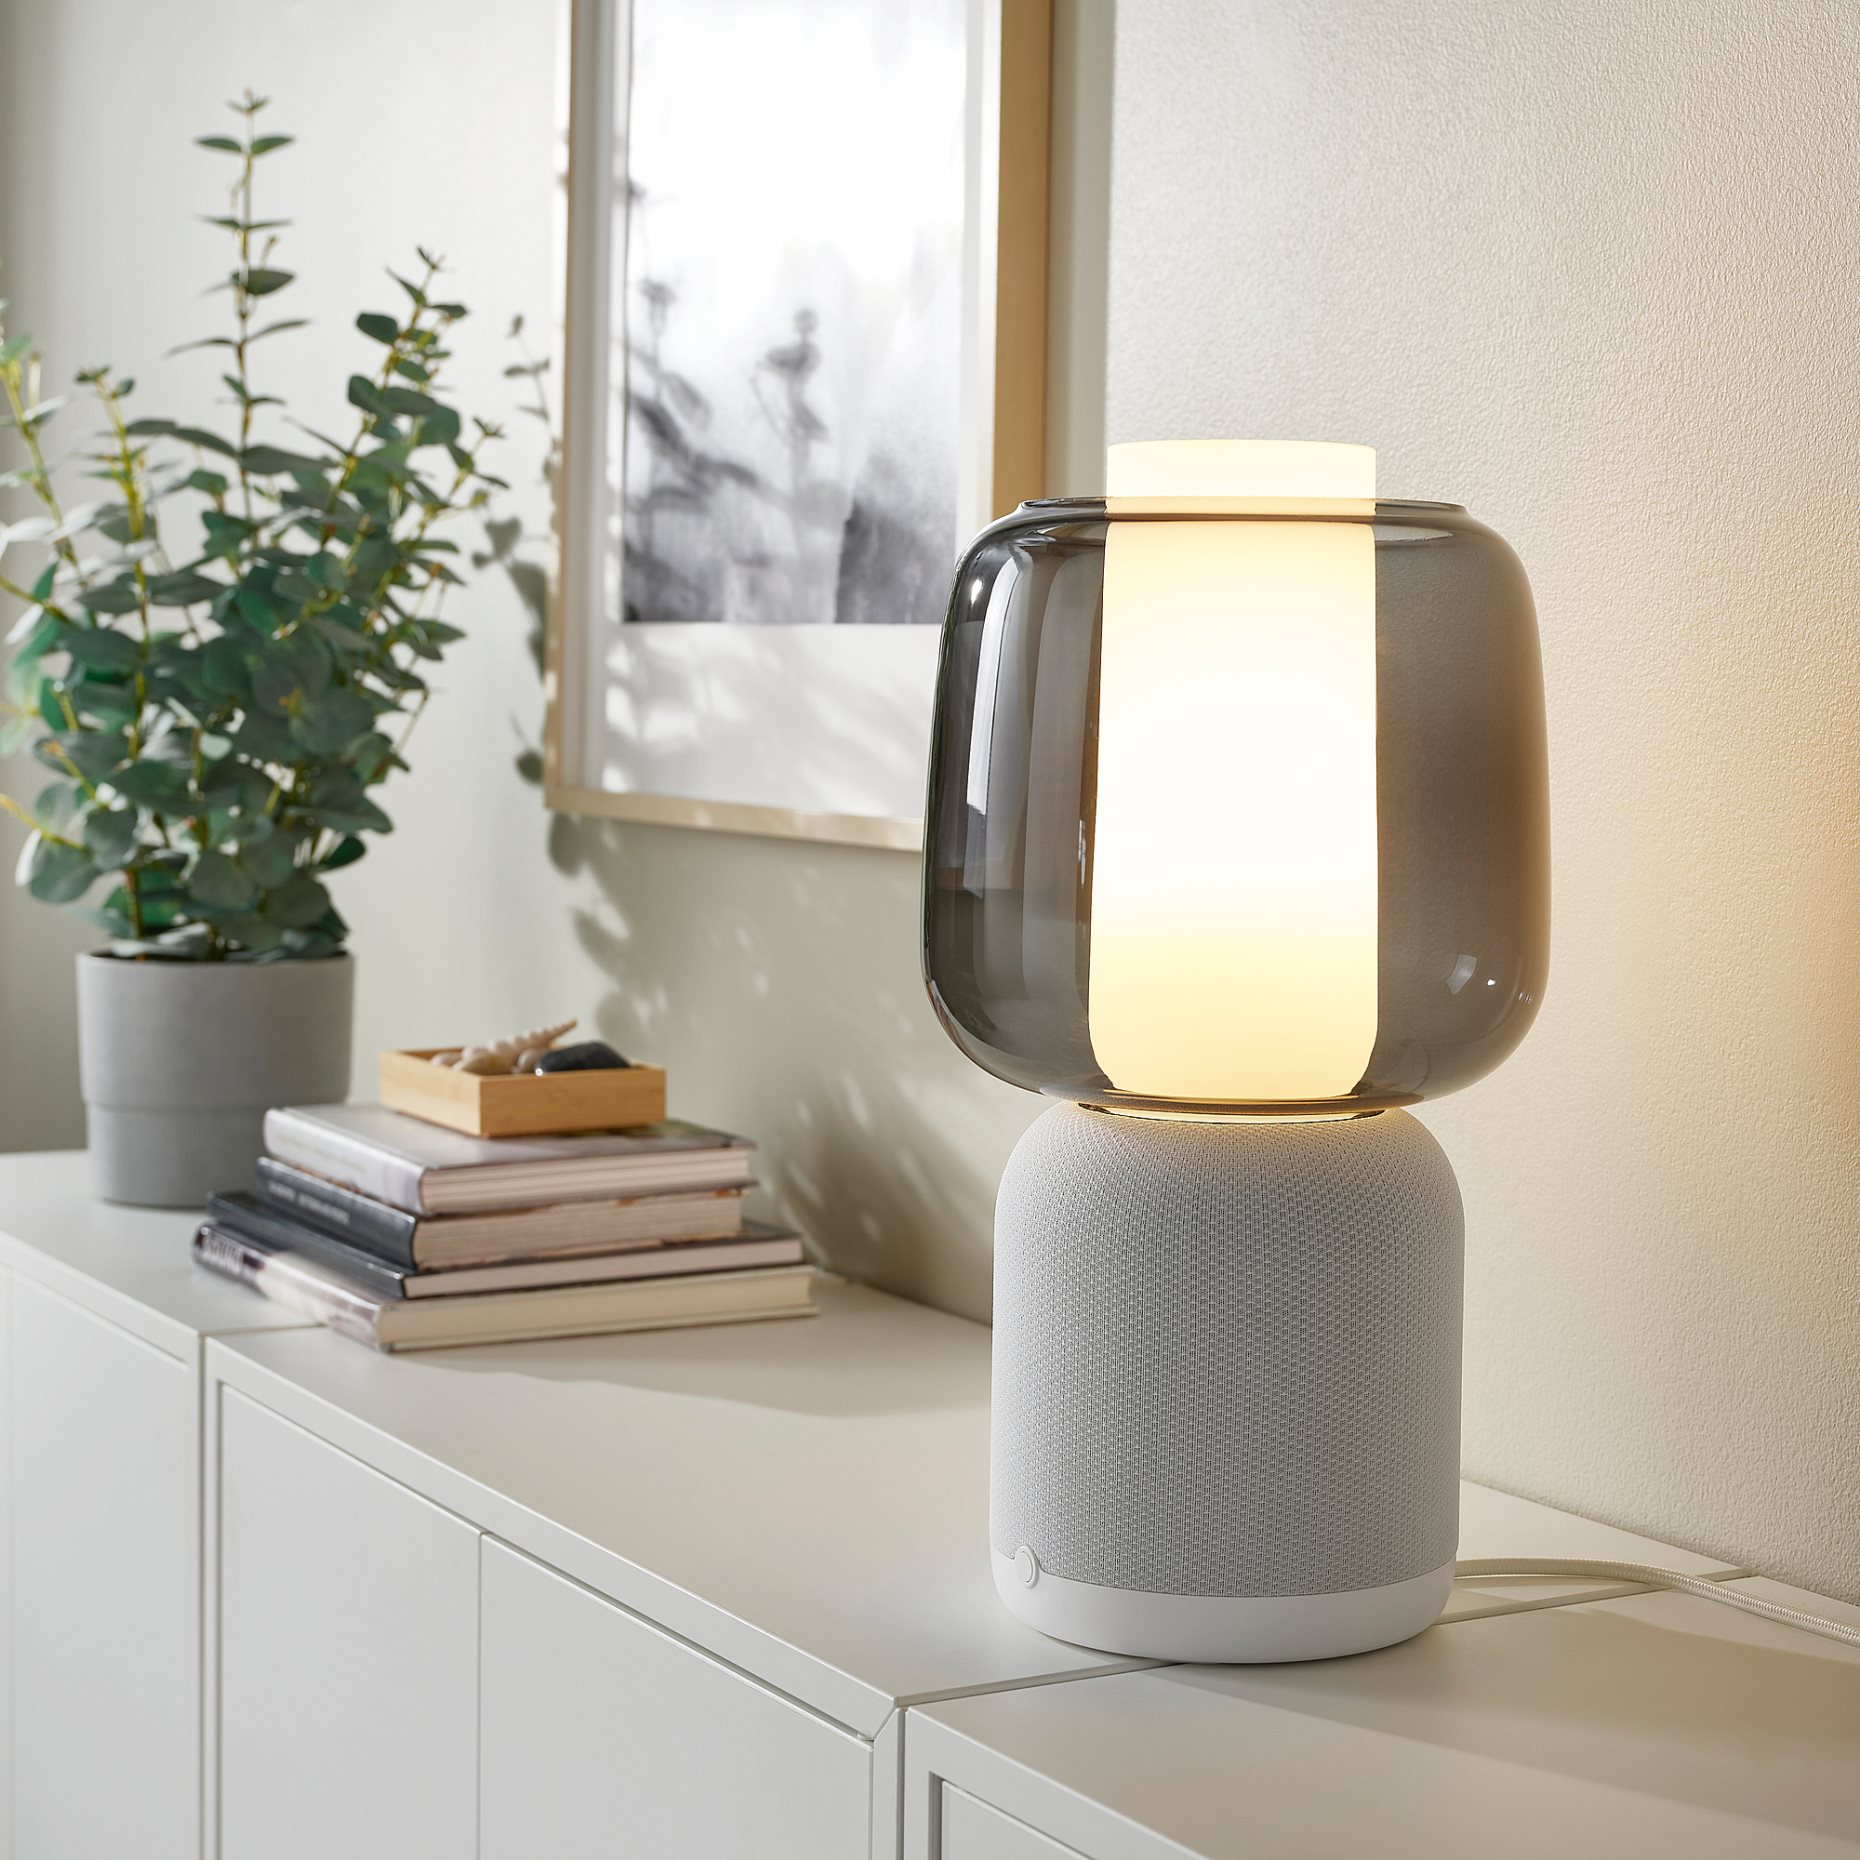 SYMFONISK, speaker lamp with Wi-Fi, glass shade, 094.827.25